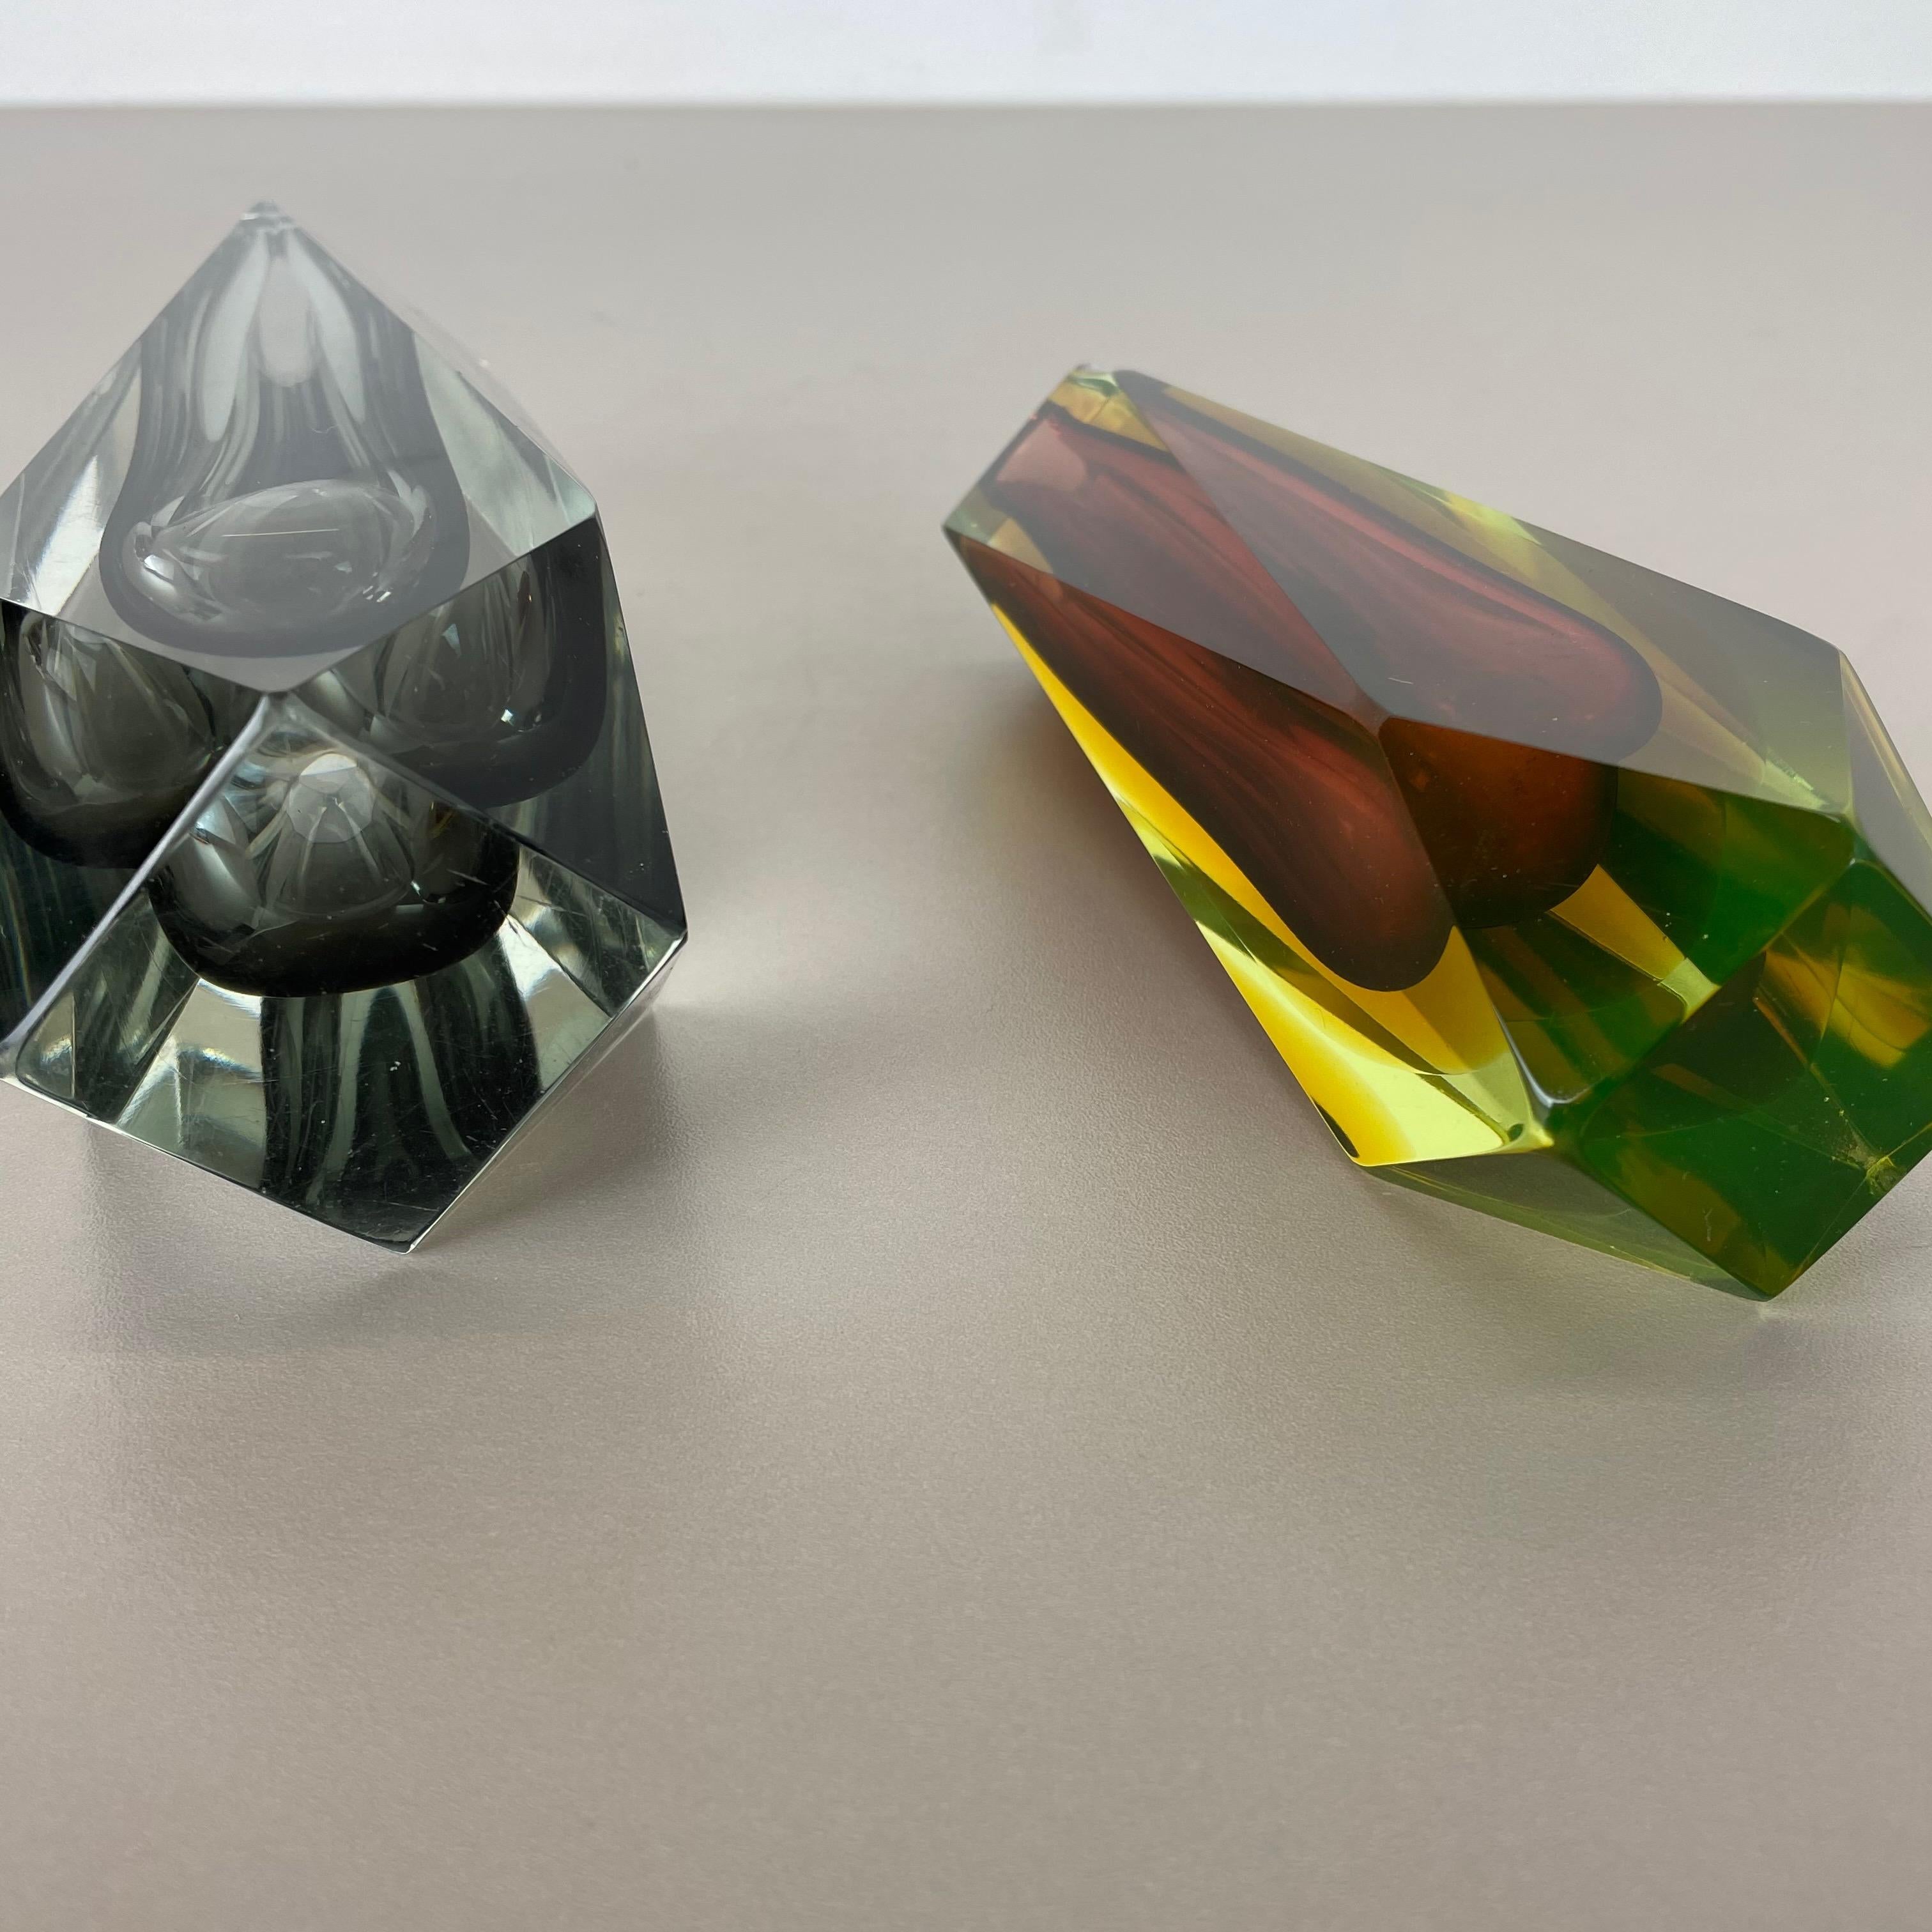 Rare Set of 2 Faceted Murano Glass Sommerso Vases, Italy, 1970s For Sale 13